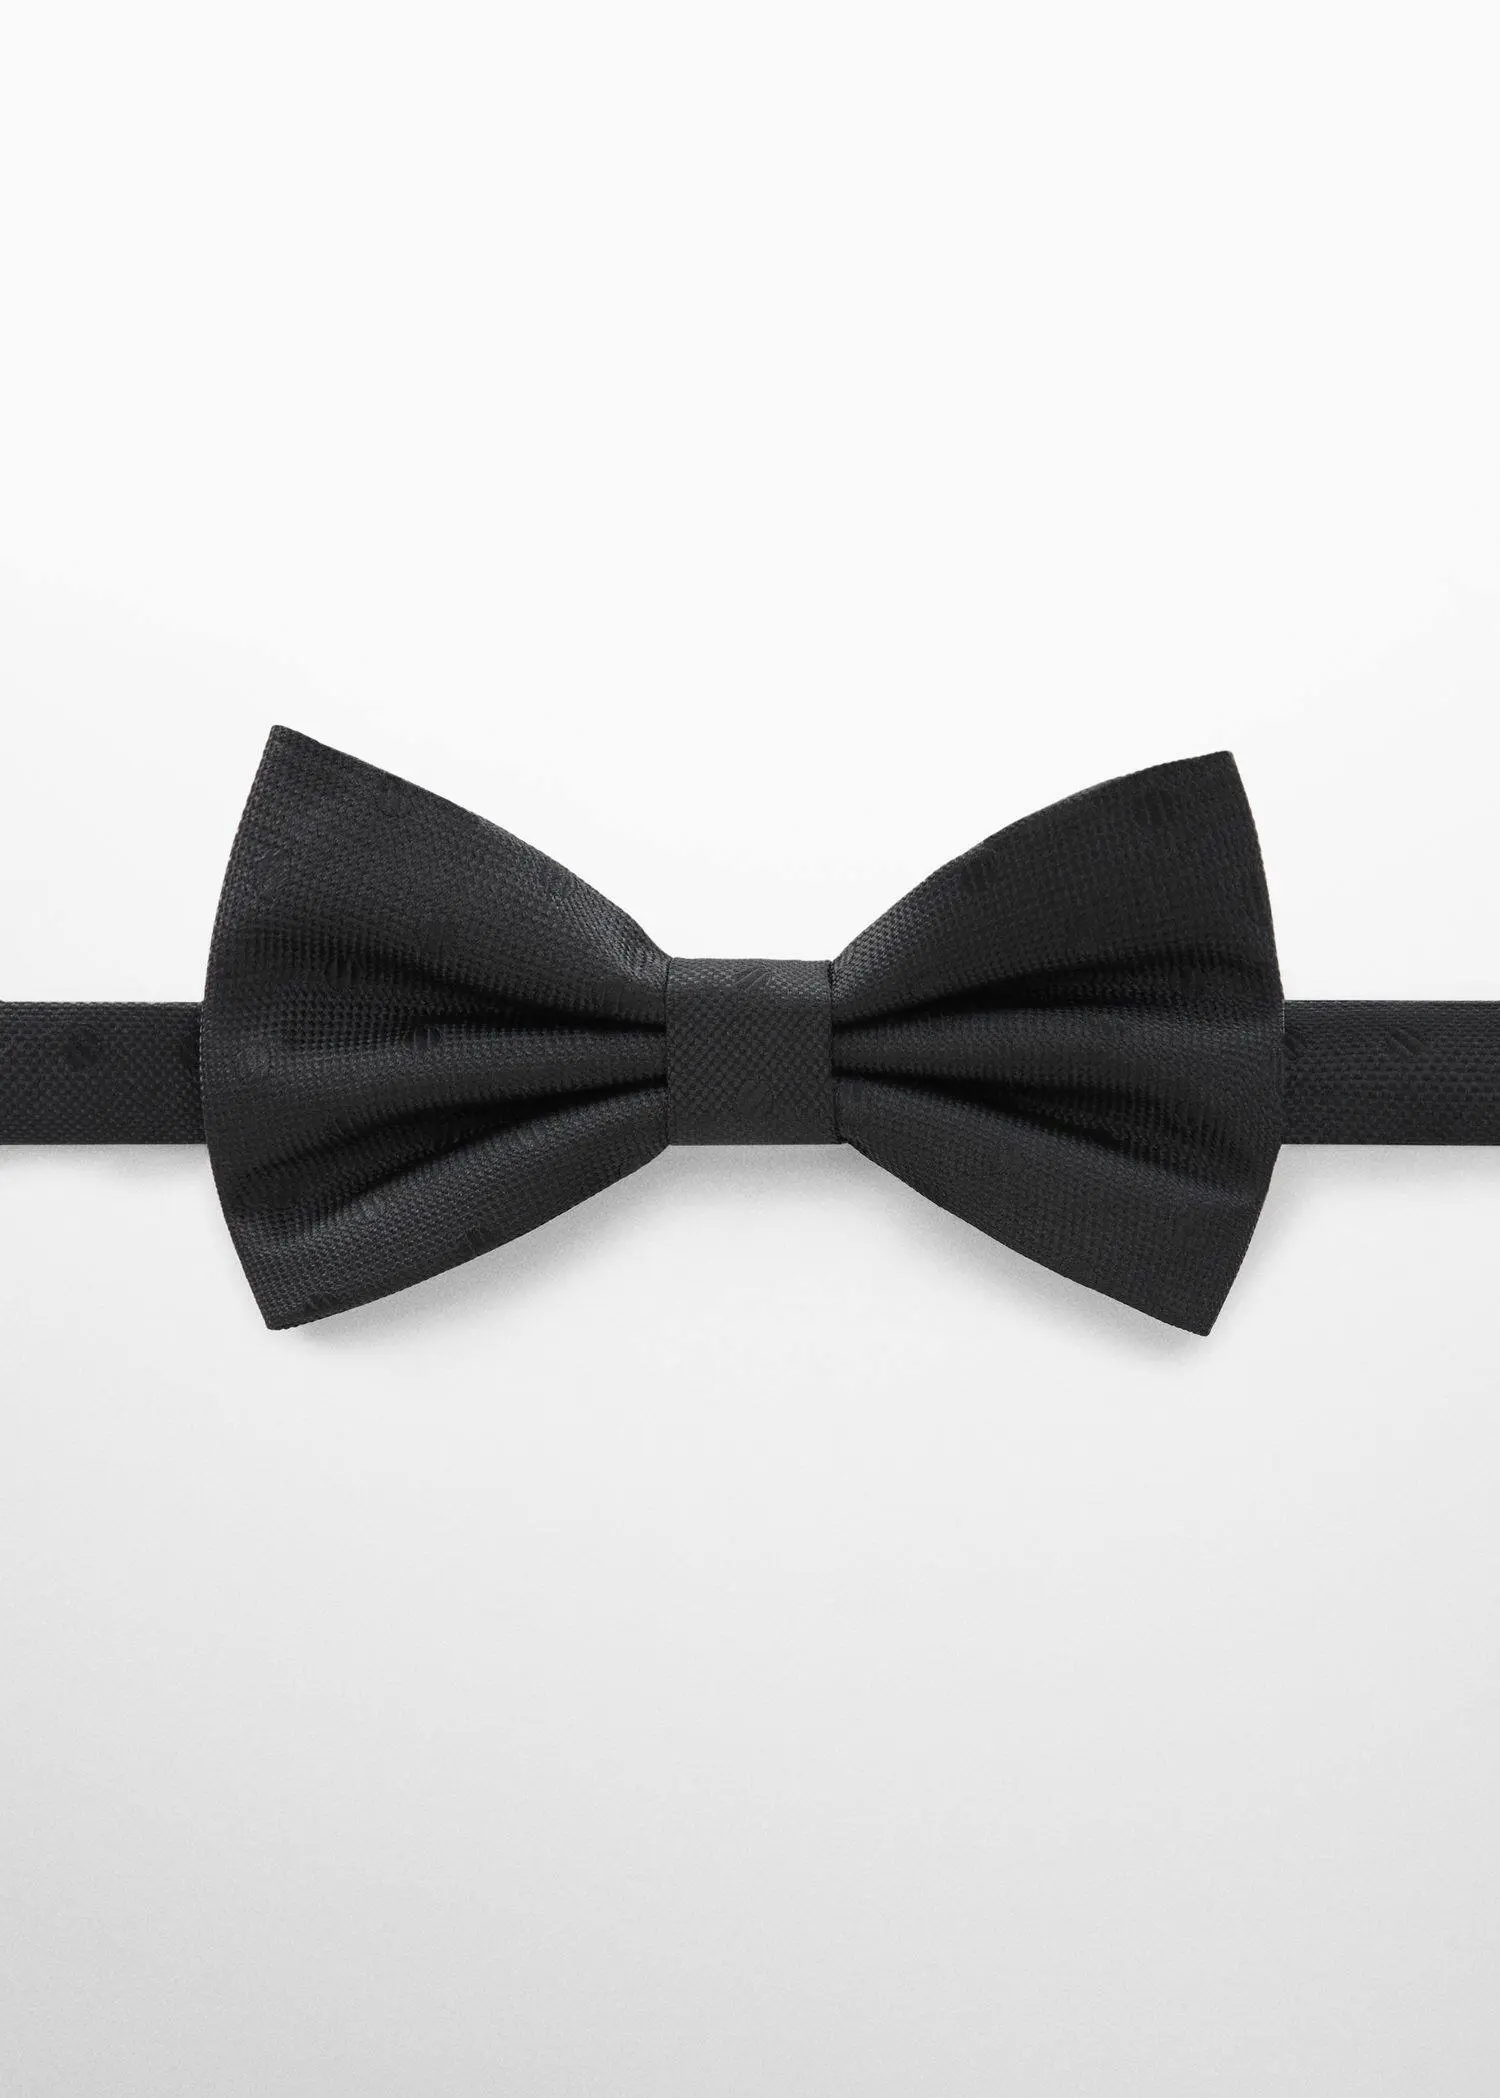 Mango Bow tie with polka-dot structure. a black bow tie on a white background. 